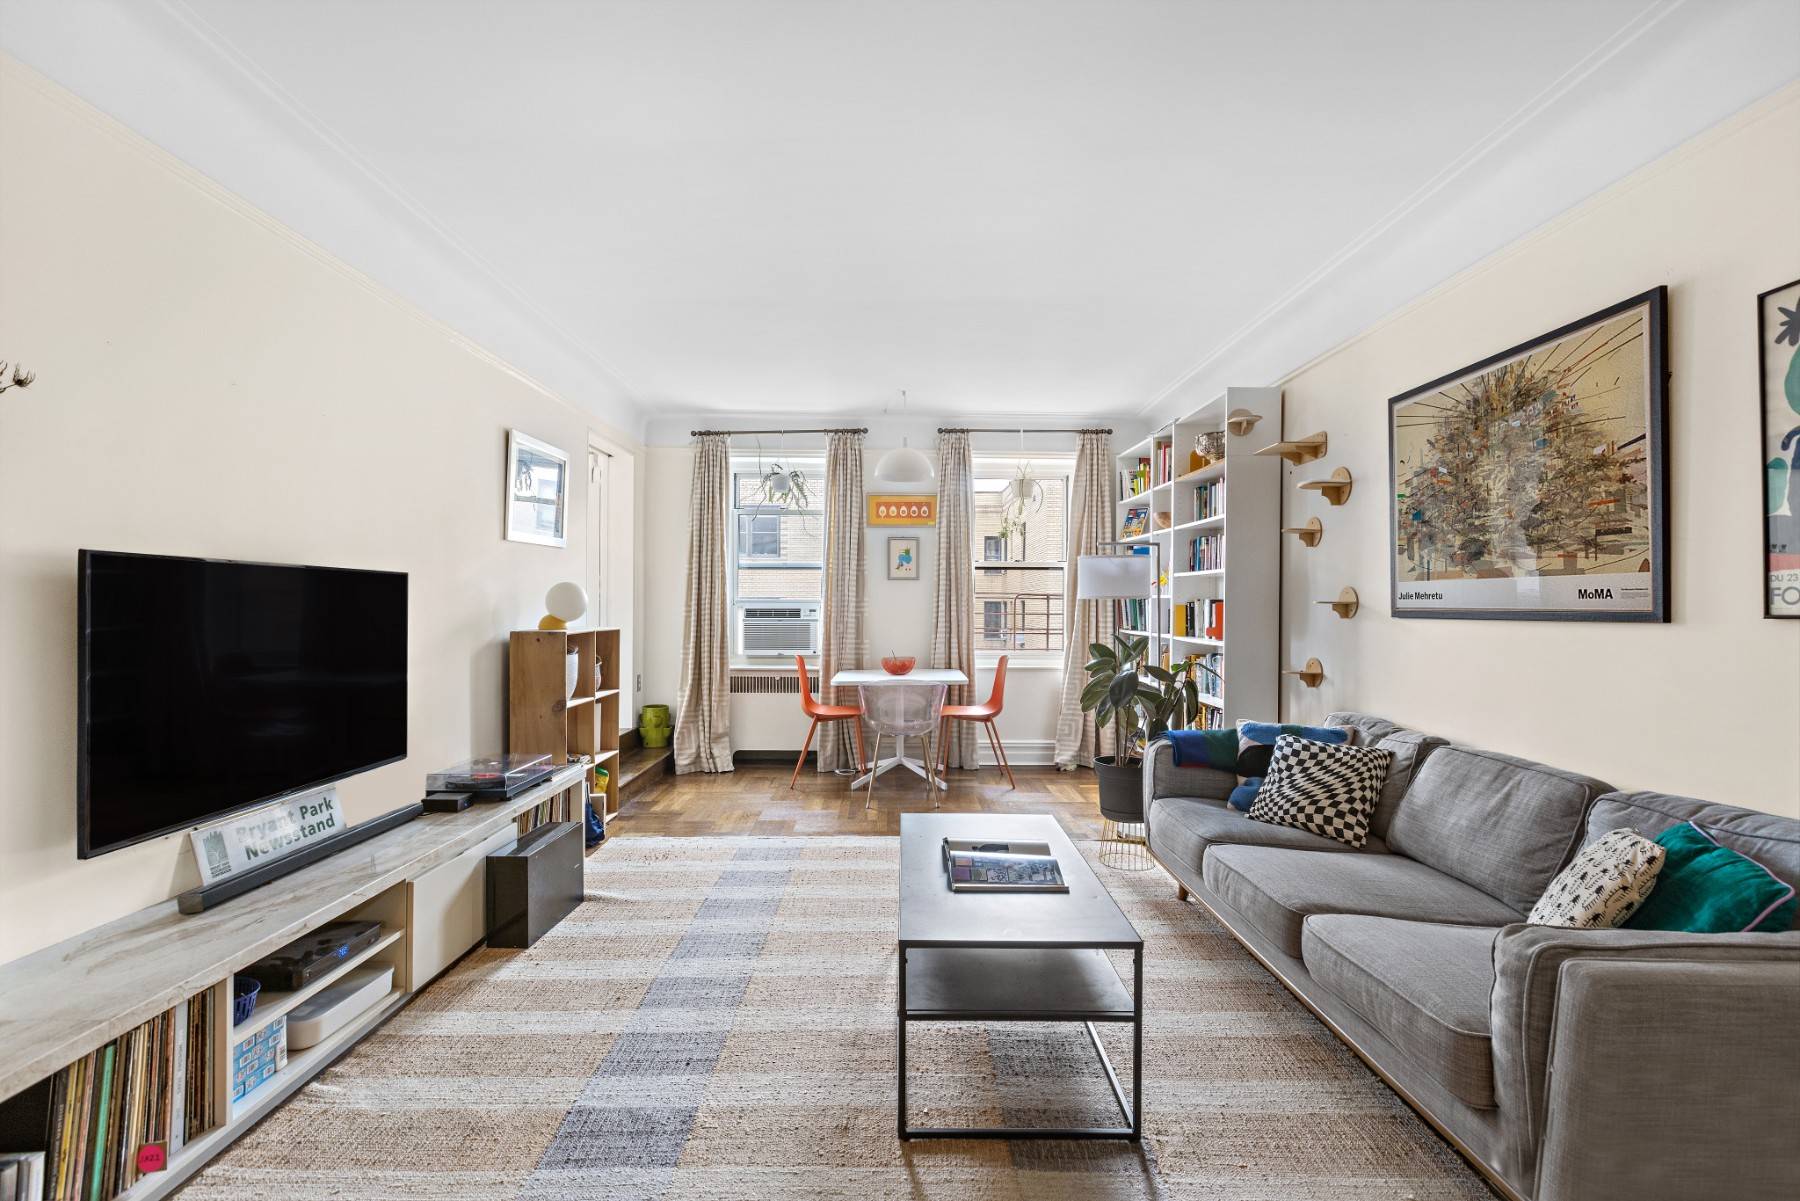 Welcome to this stunning 1 bedroom, 1 bathroom co op located in the vibrant Hudson Heights.